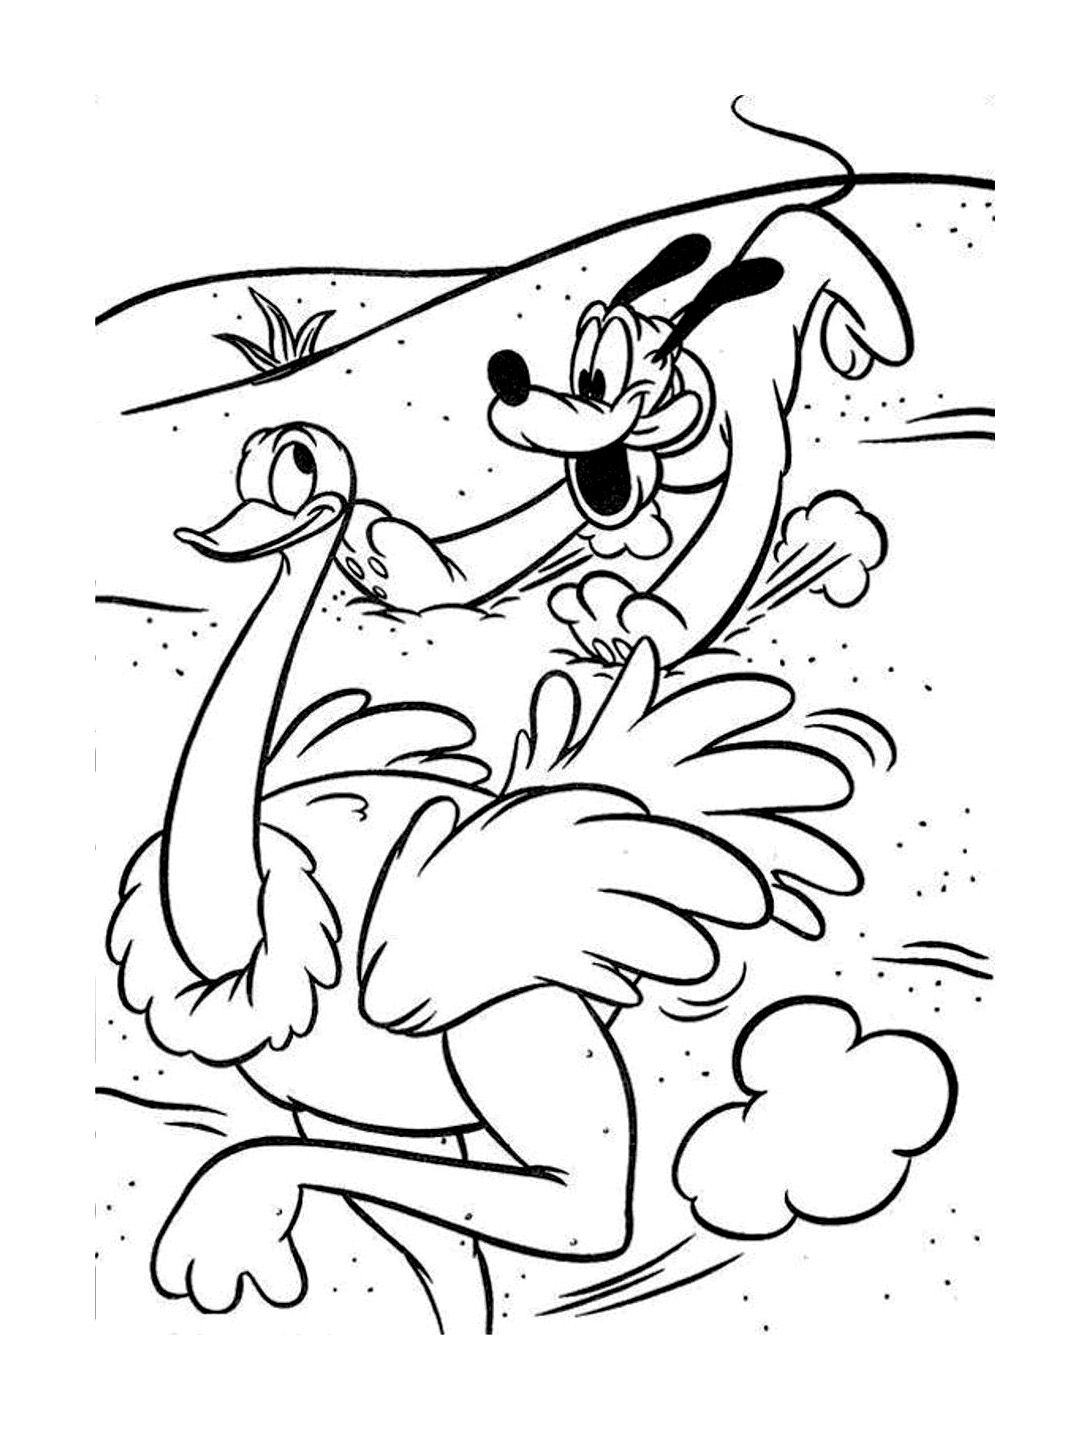 Funny Pluto coloring page for kids